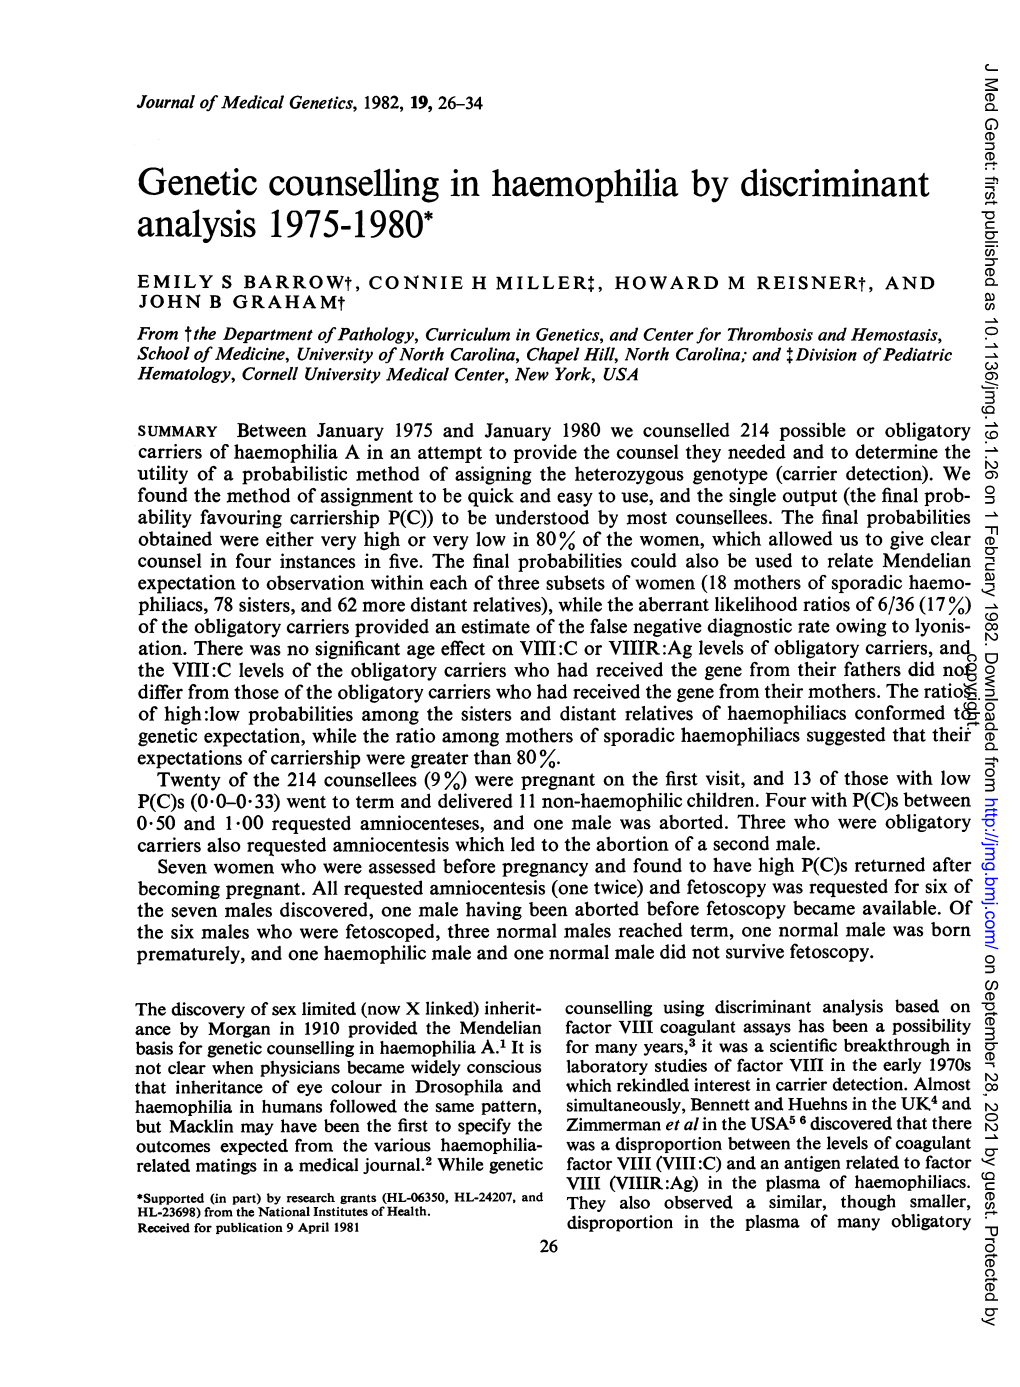 Genetic Counselling in Haemophilia by Discriminant Analysis 1975-1980*